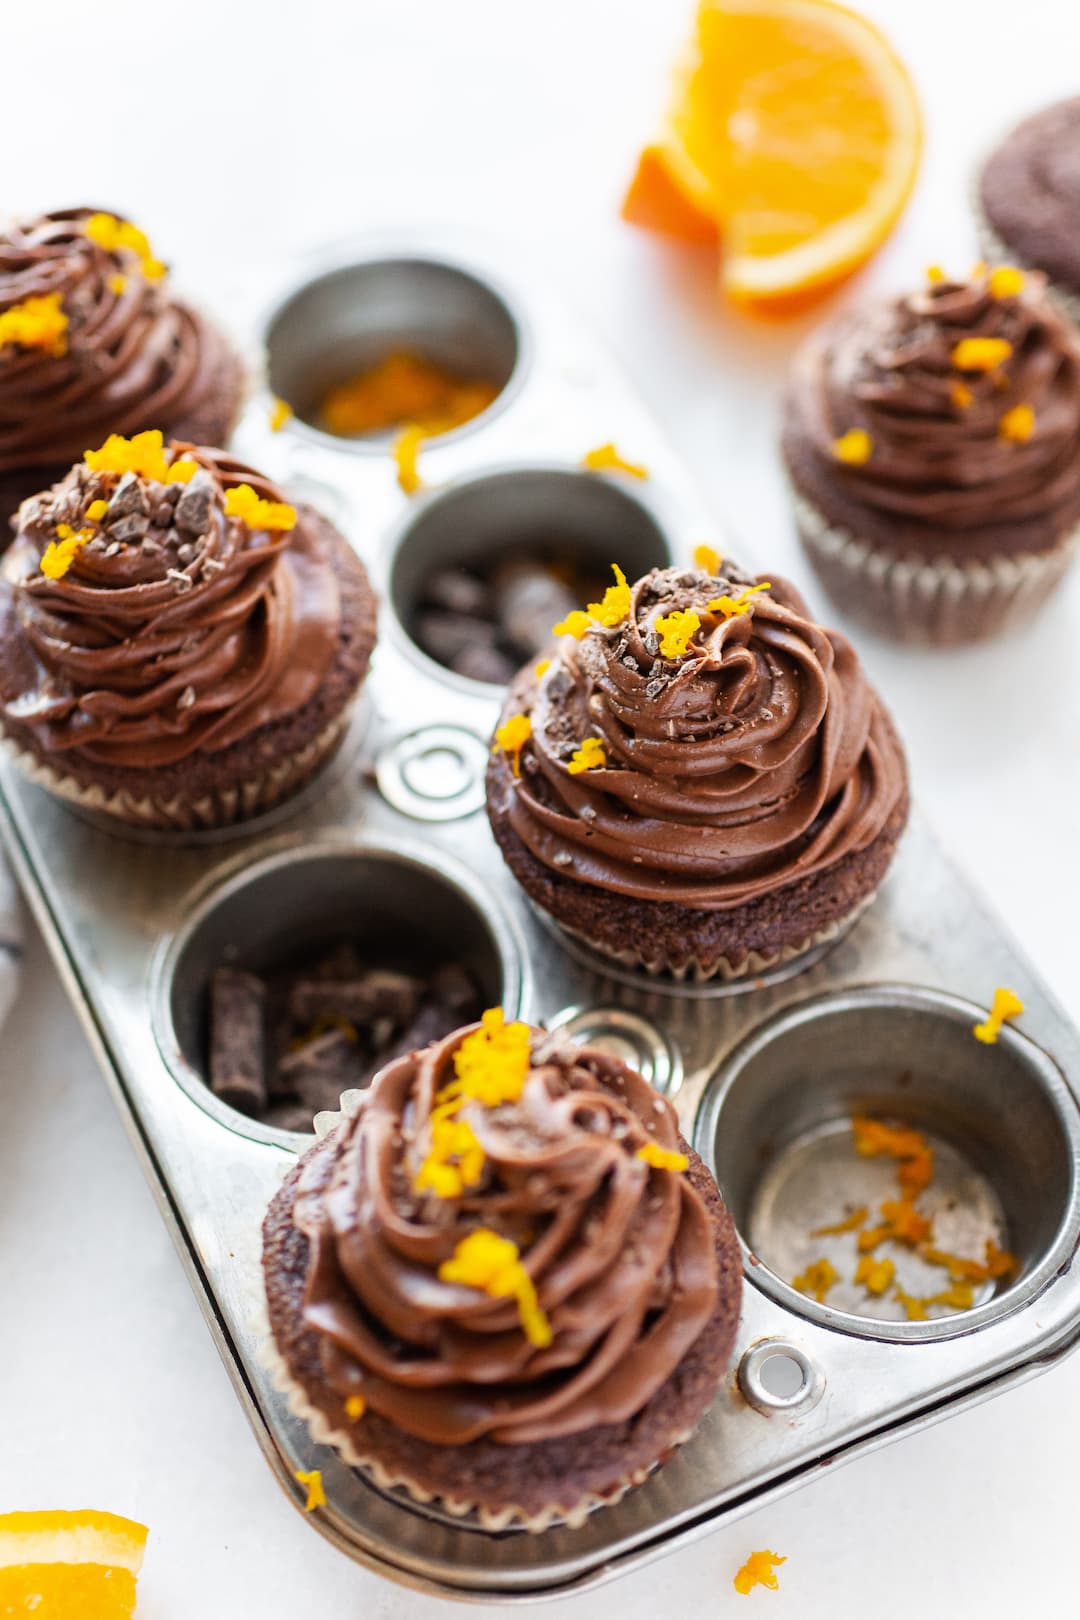 image of a small cupcake pan with 6 chocolate cupcakes topped with chocolate icing and orange zest